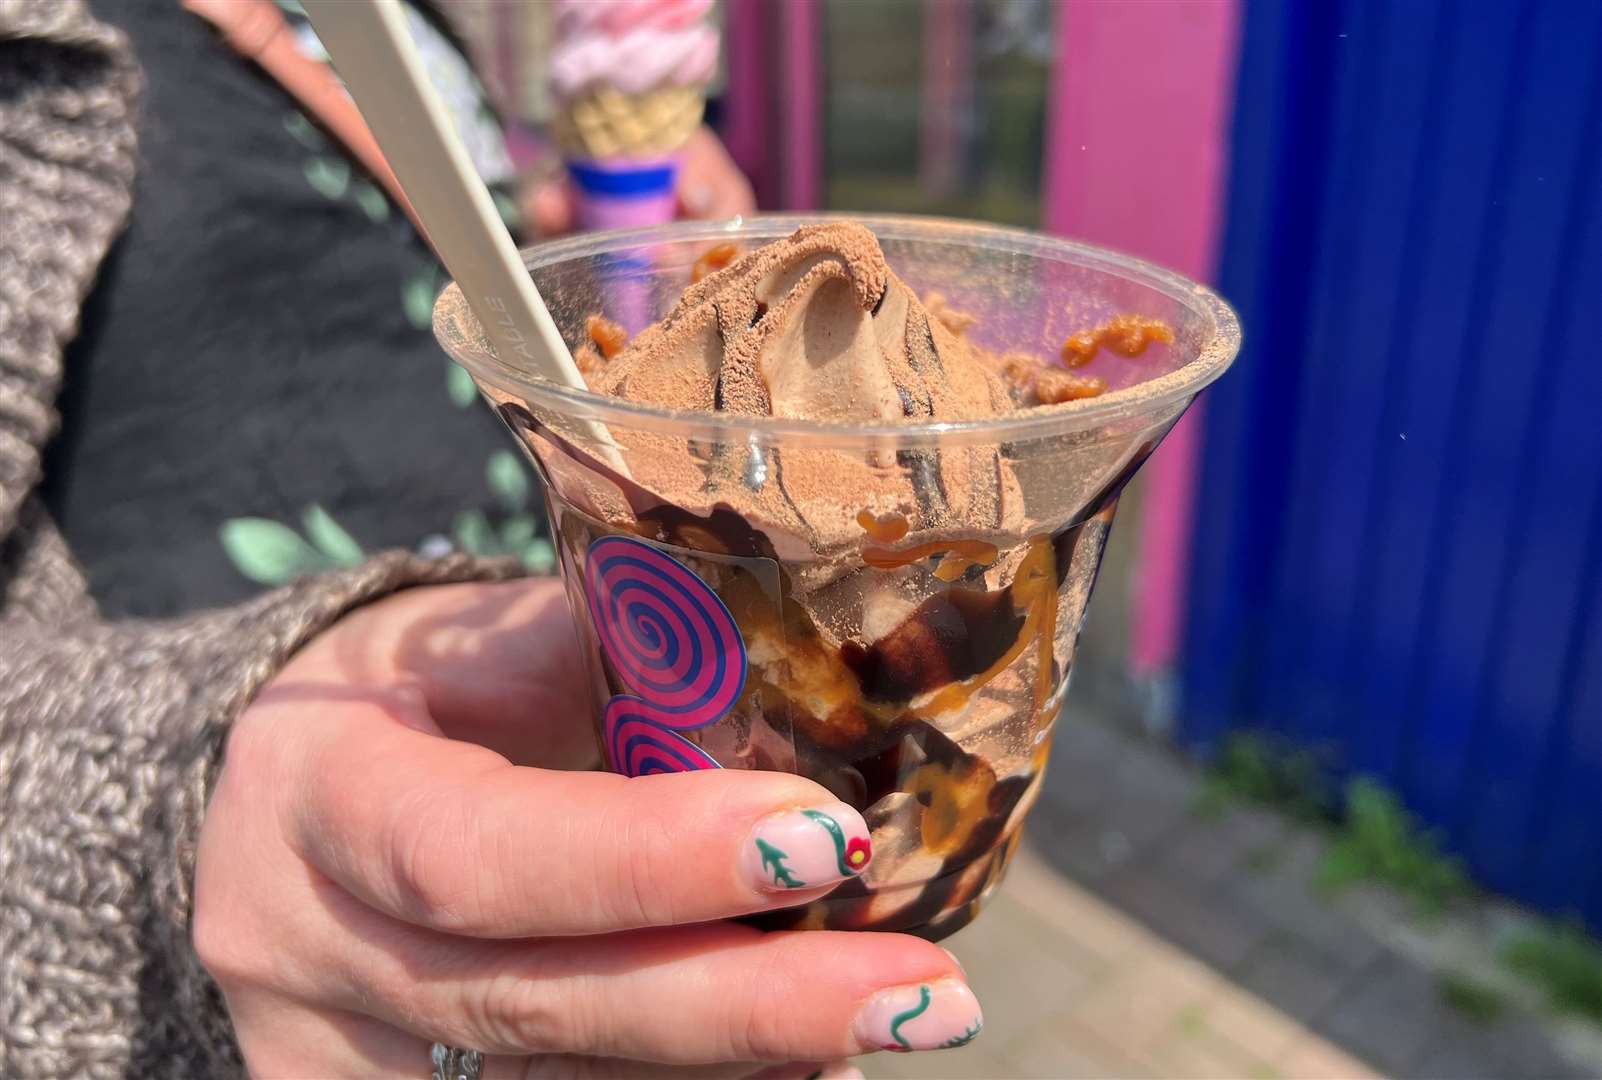 This was the stand-out...a chocolate sundae to die for (or at least queue up for)